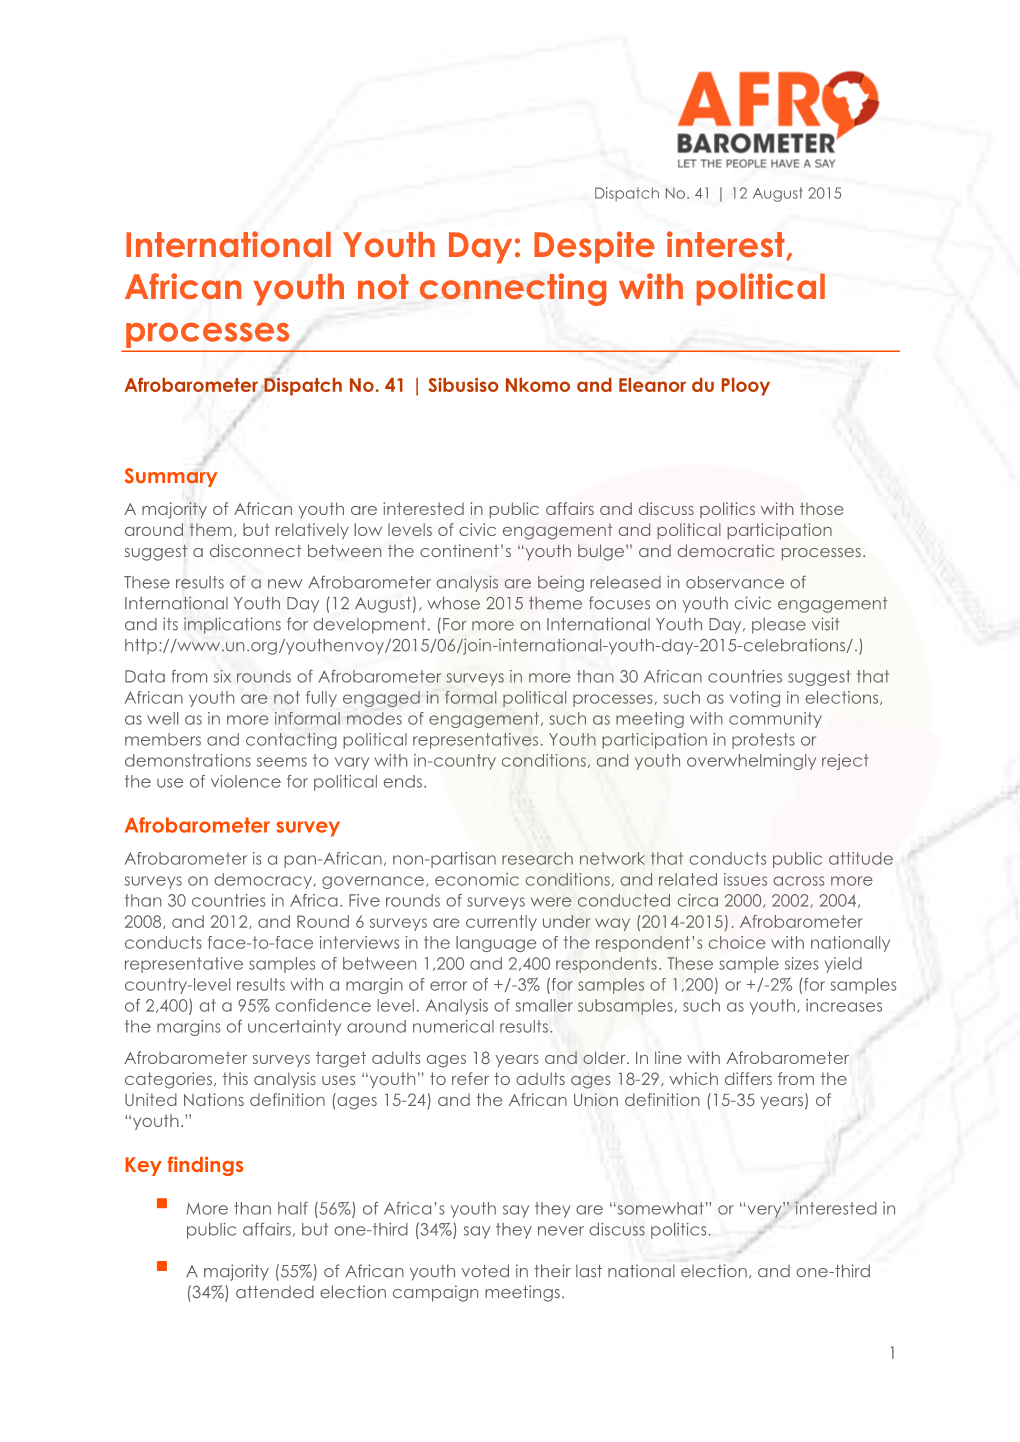 International Youth Day: Despite Interest, African Youth Not Connecting with Political Processes